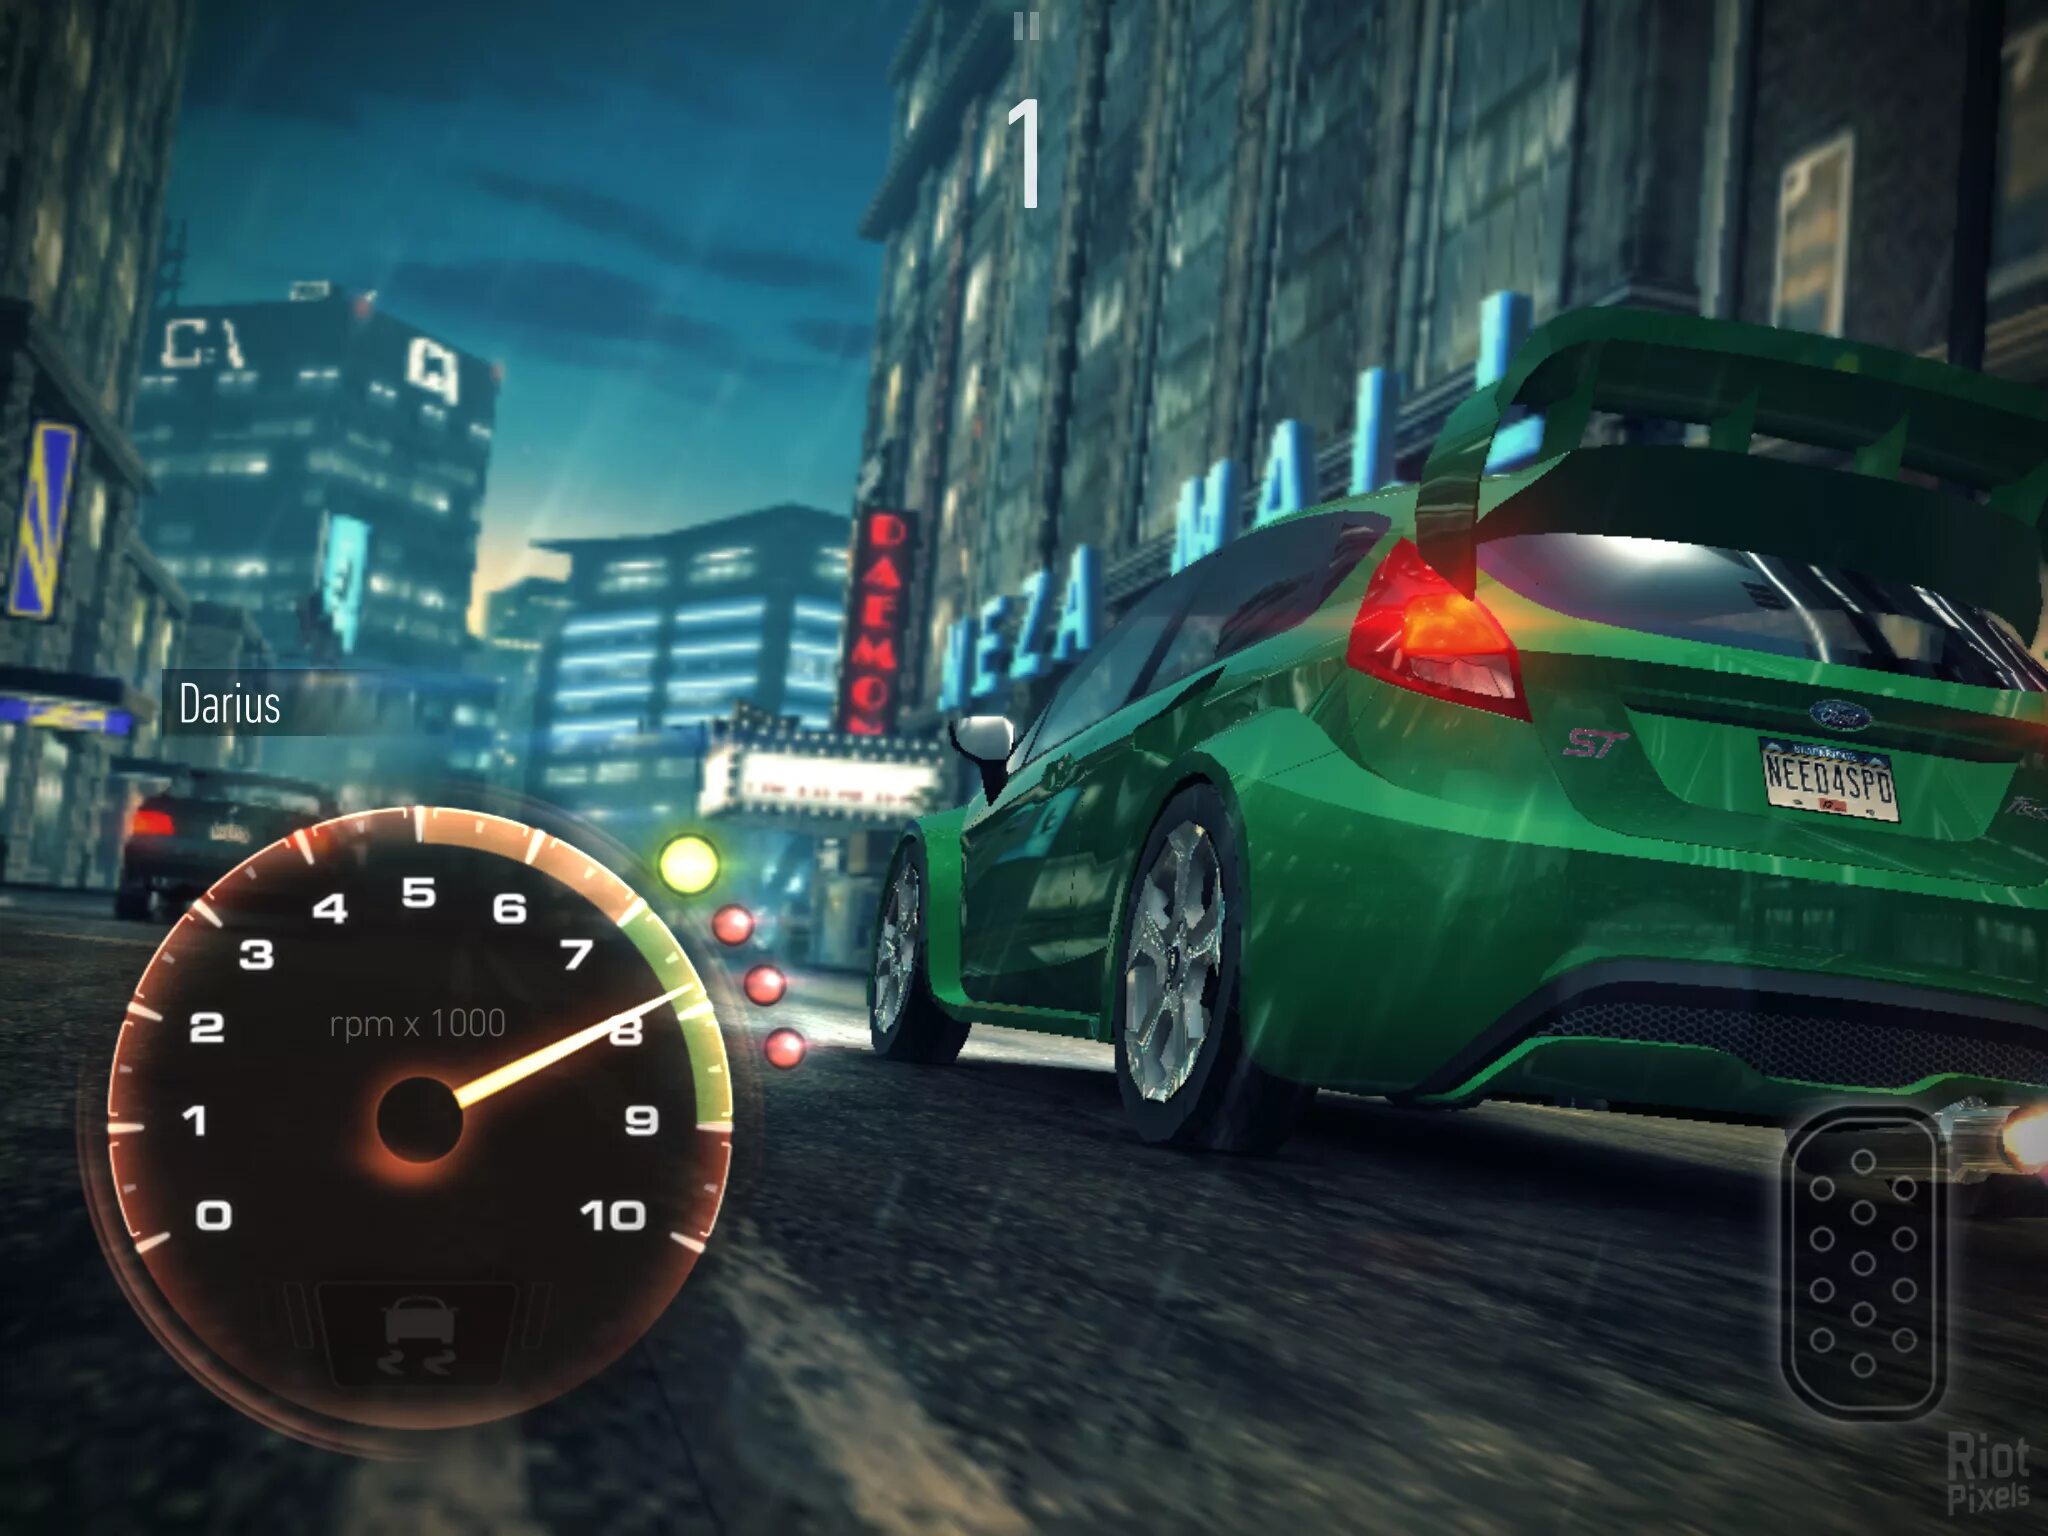 Need for Speed no limits. Игра NFS no limits. Need for Speed nl гонки. Нфс no limits. Игра need for speed nl гонки